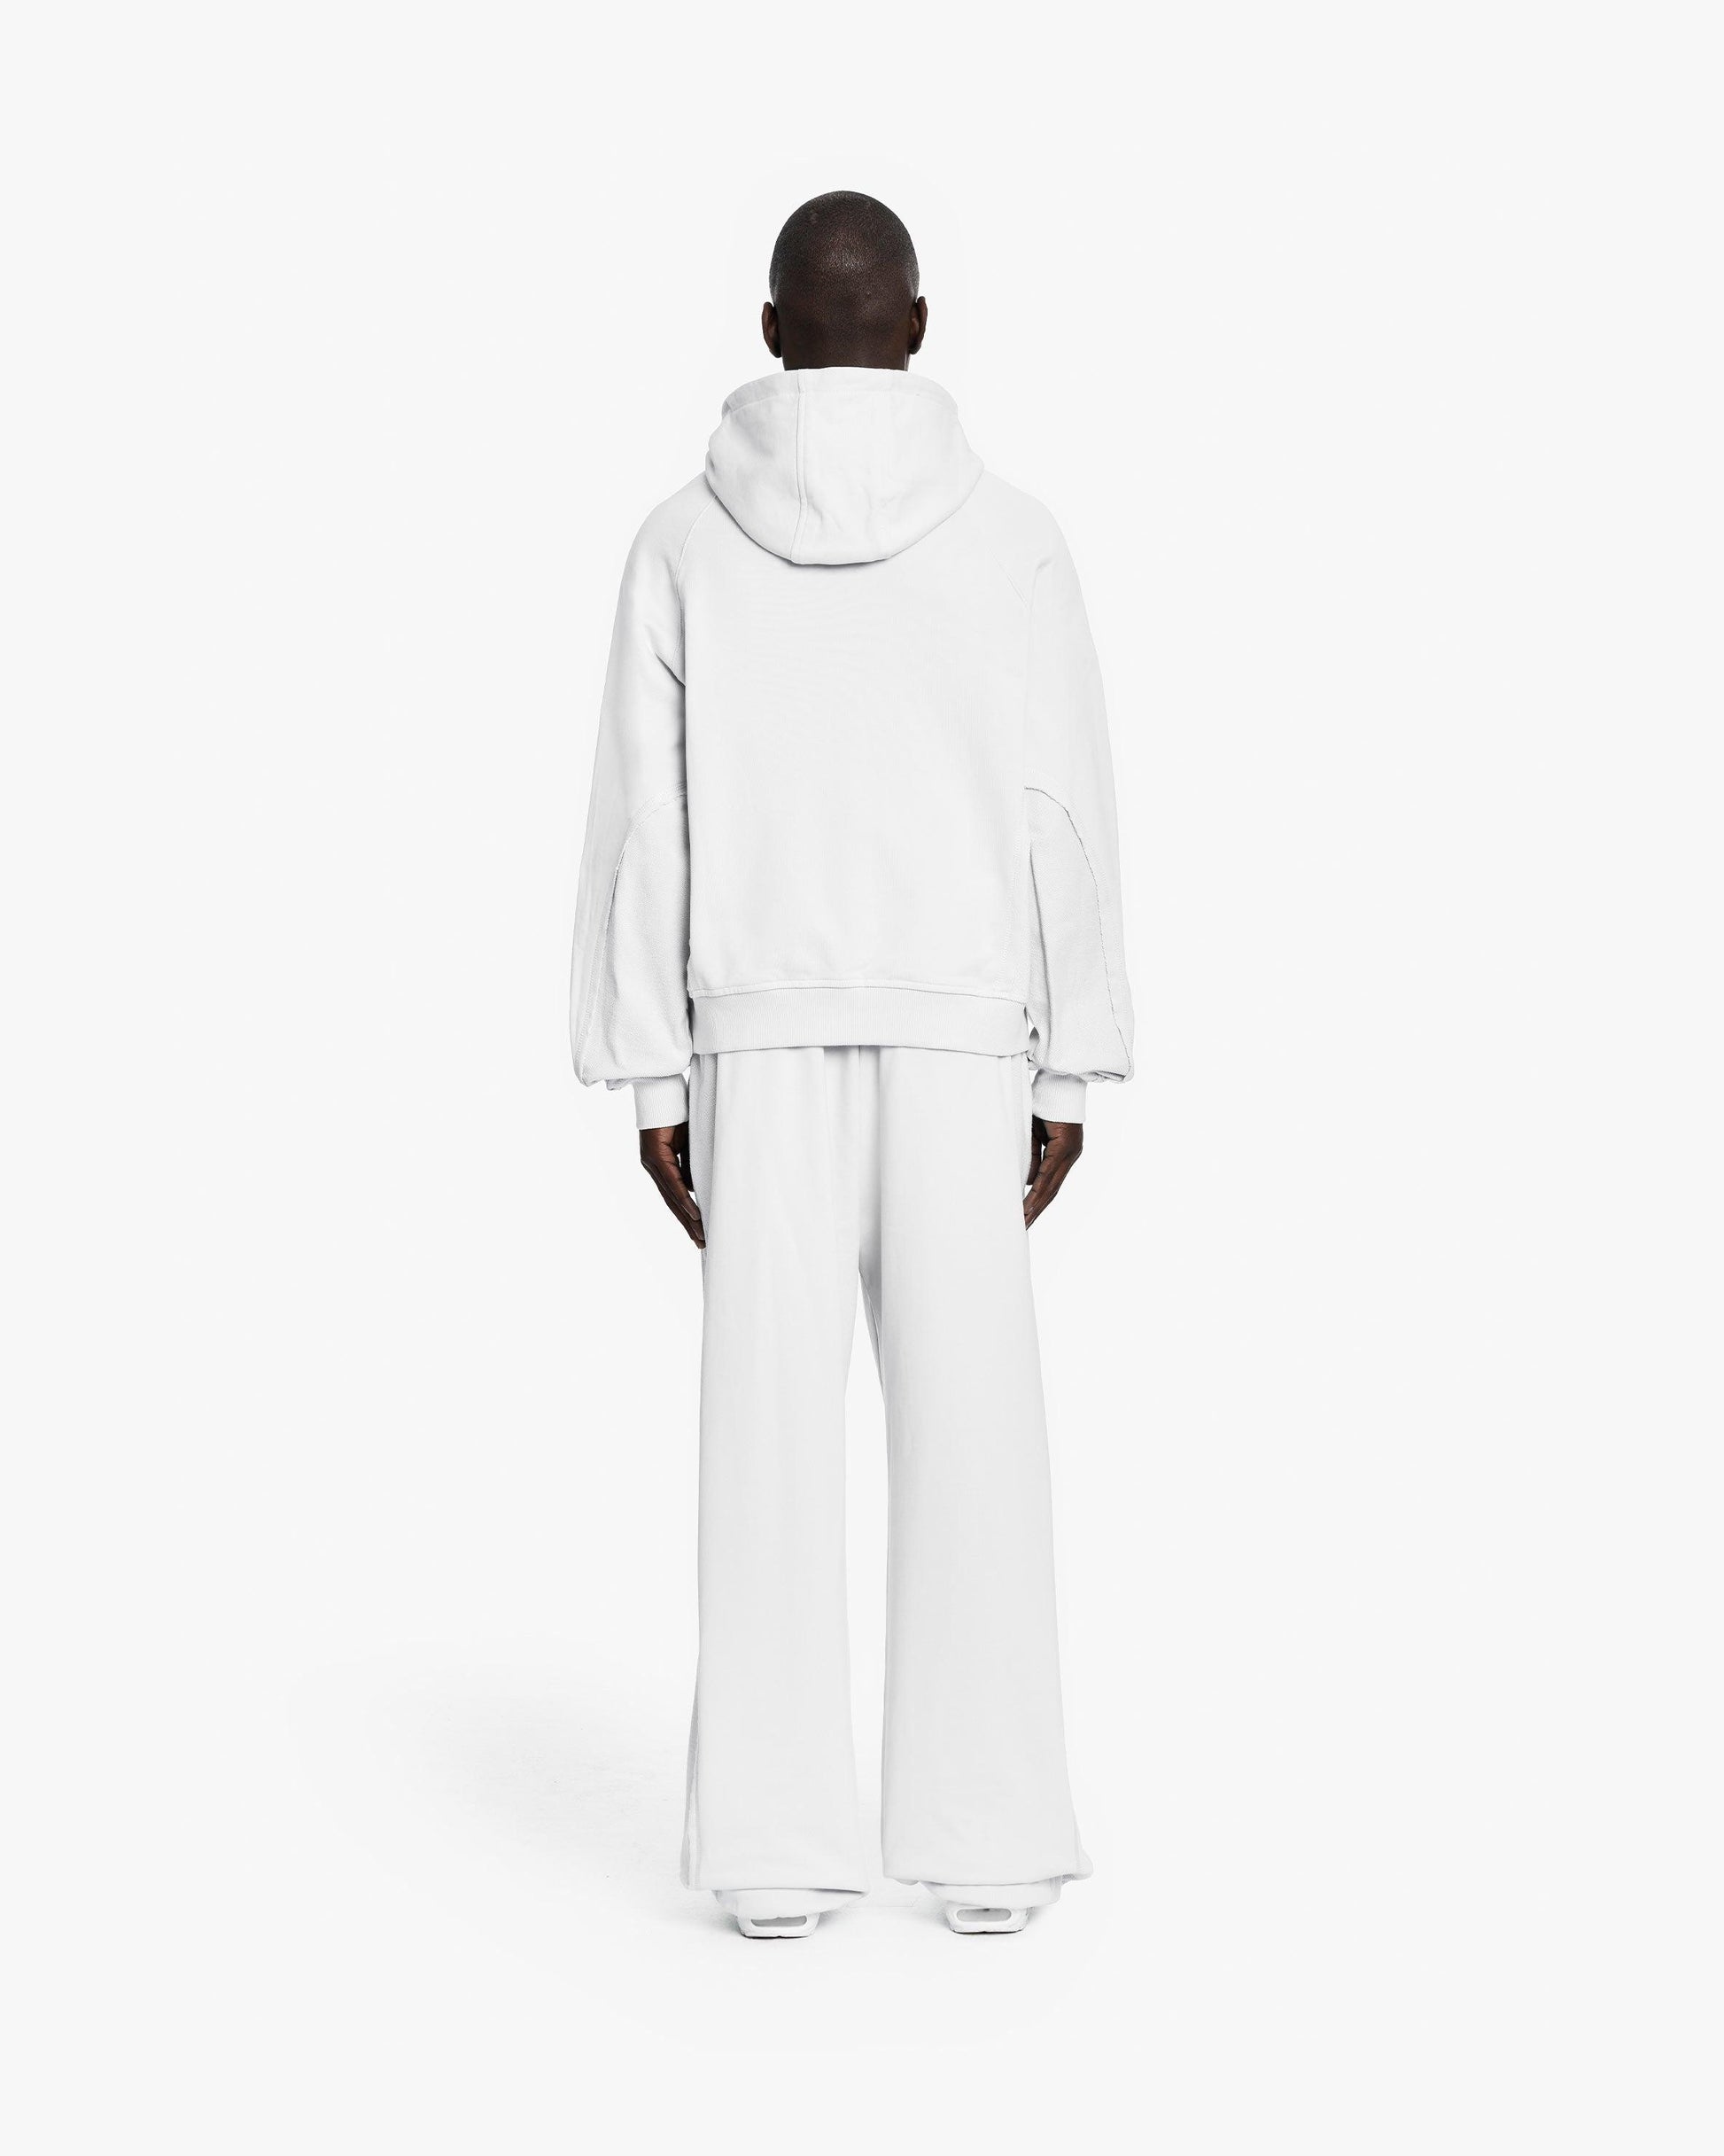 INSIDE OUT ZIP HOODIE WHITE - VICINITY